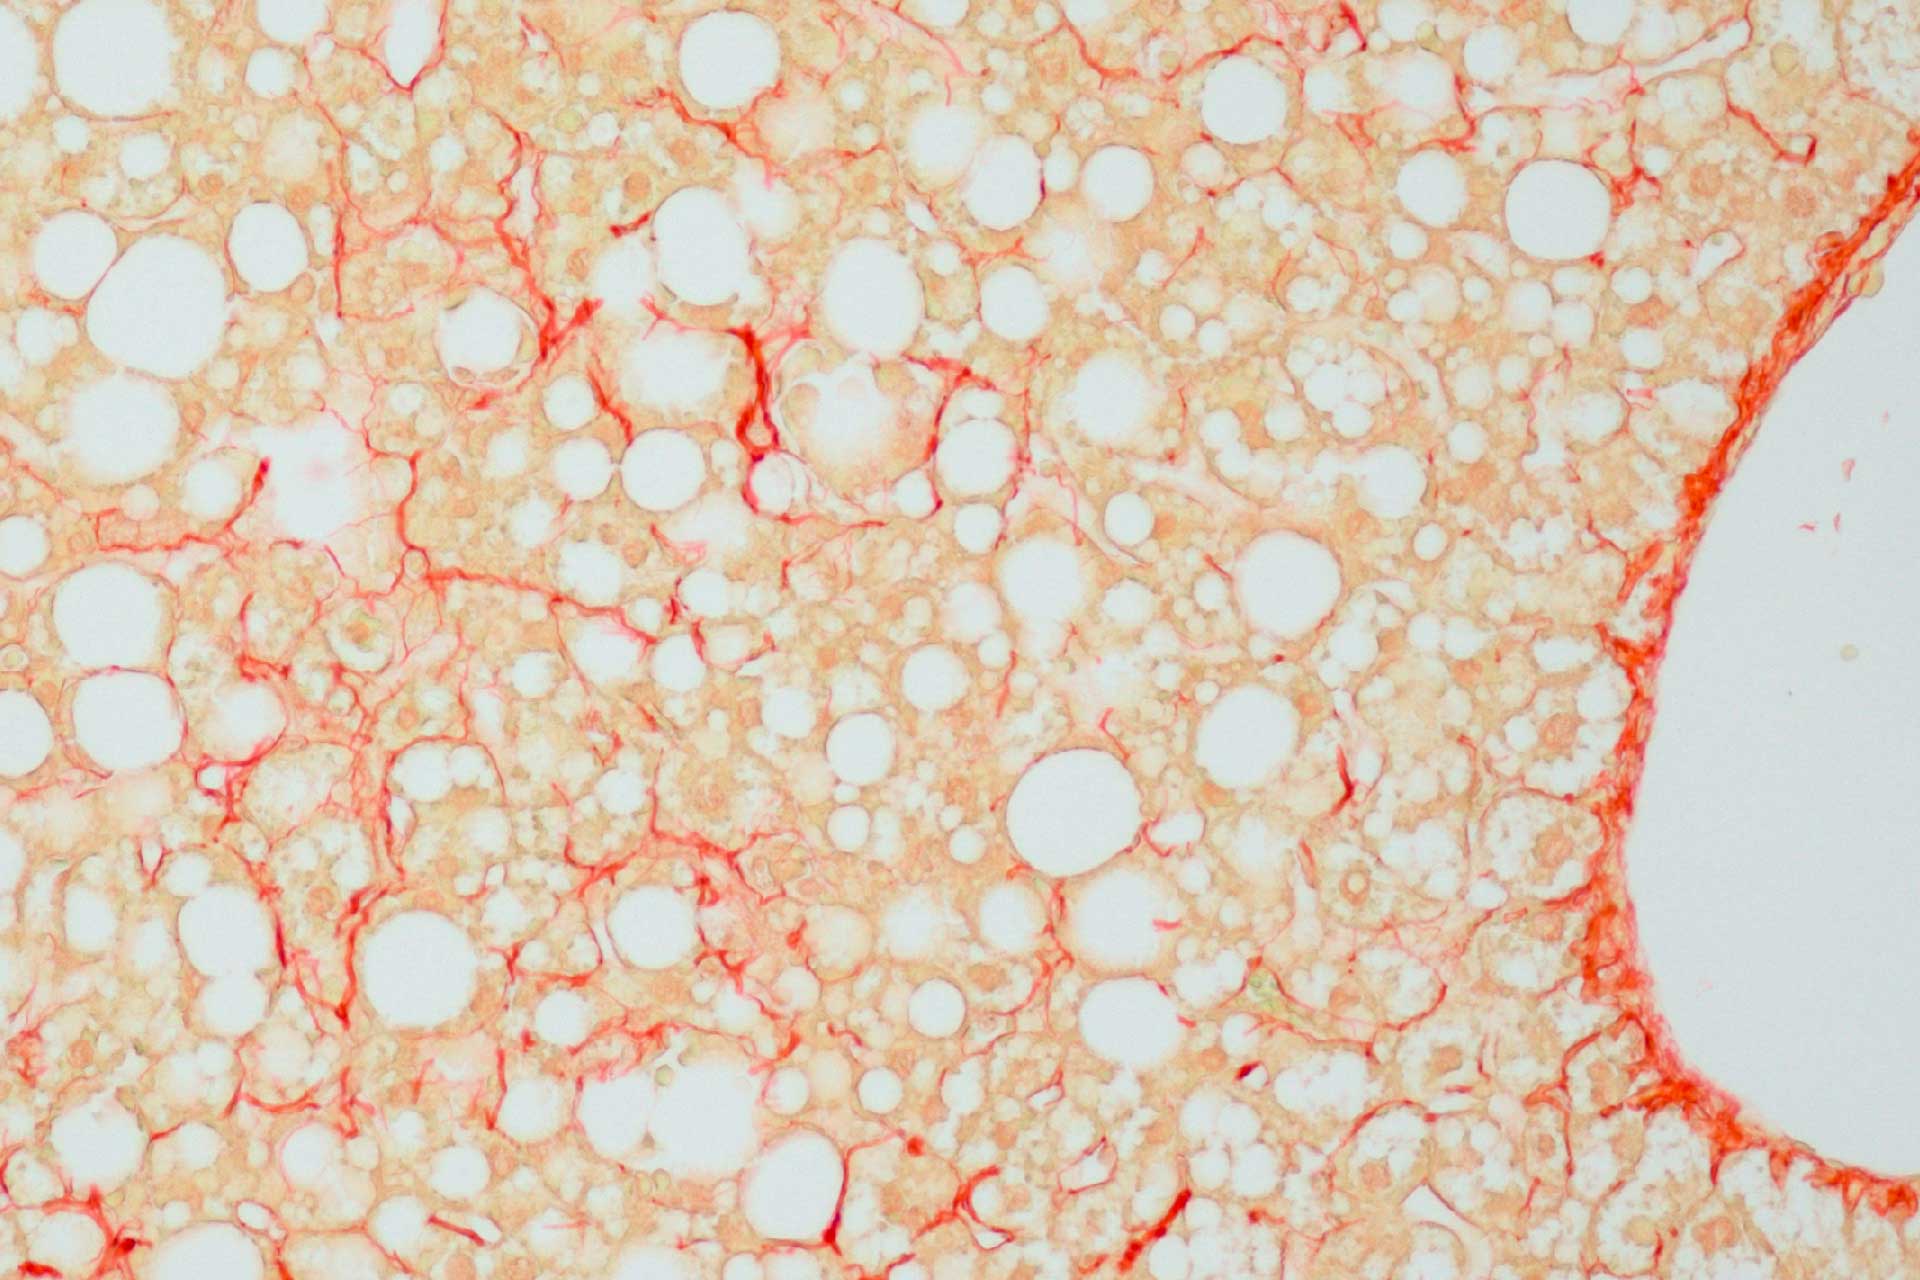 Mouse liver with connective collagenous tissue